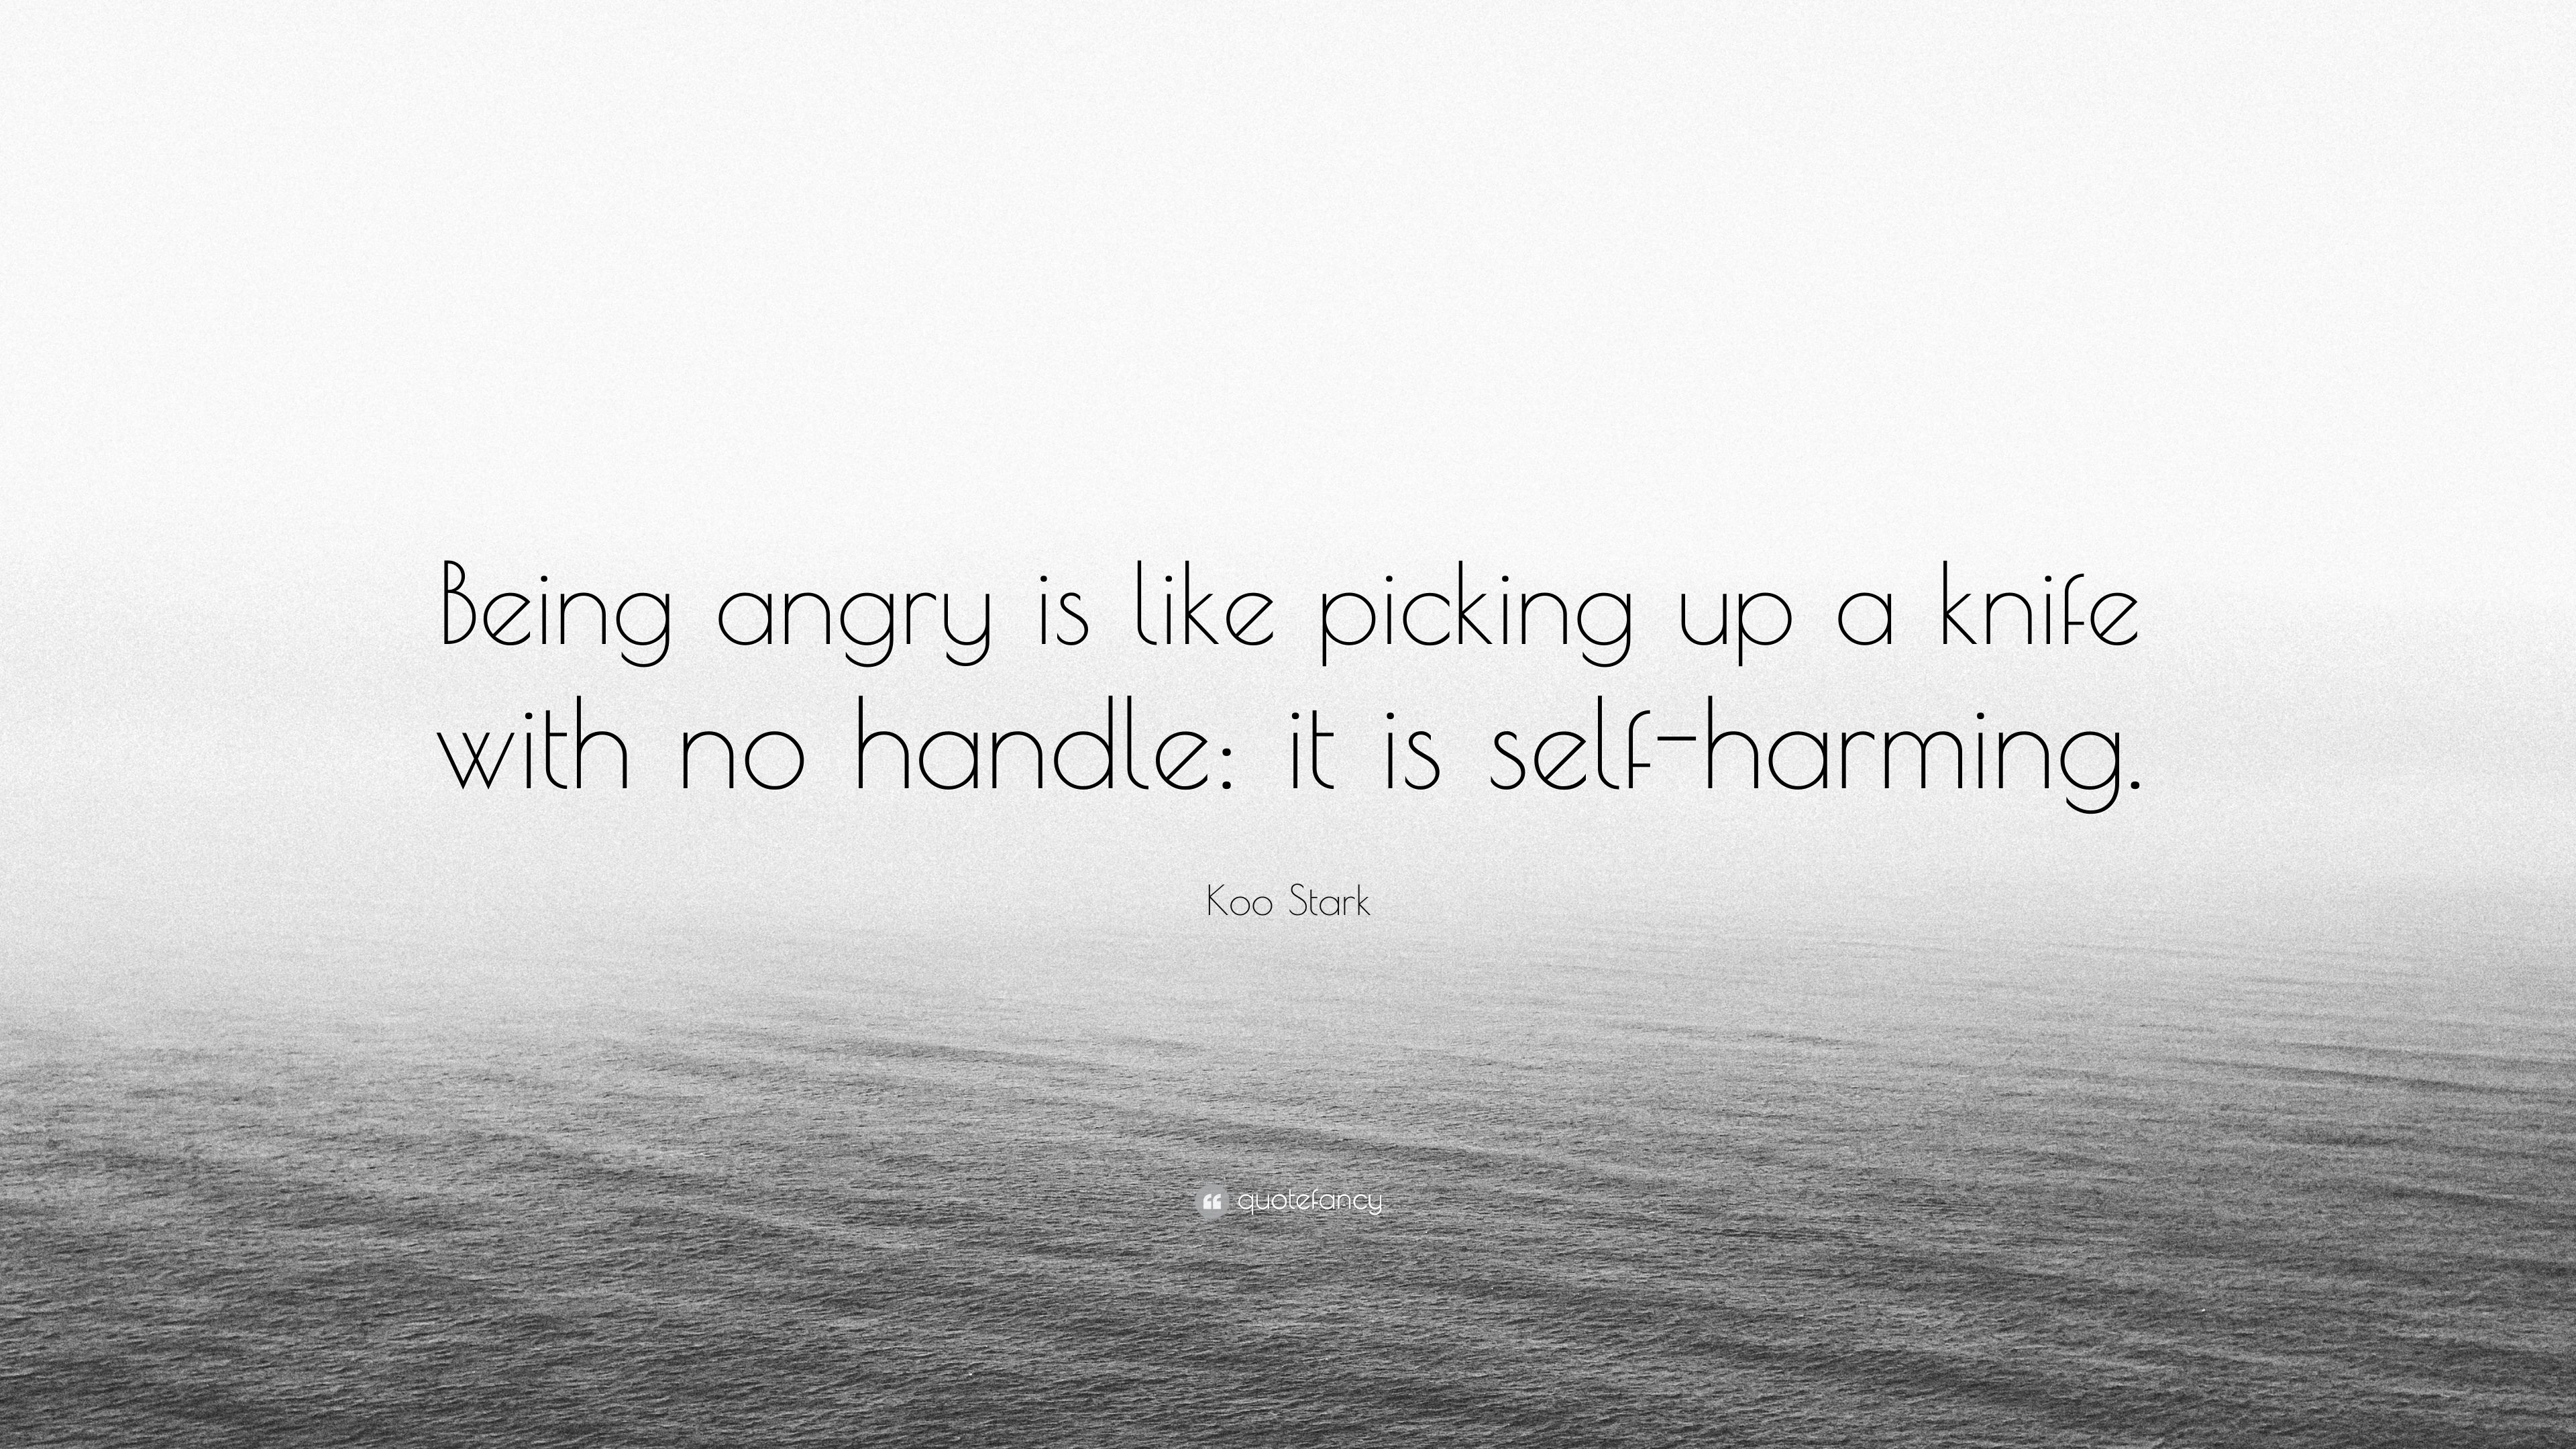 Koo Stark Quote: “Being angry is like picking up a knife with no handle: it is